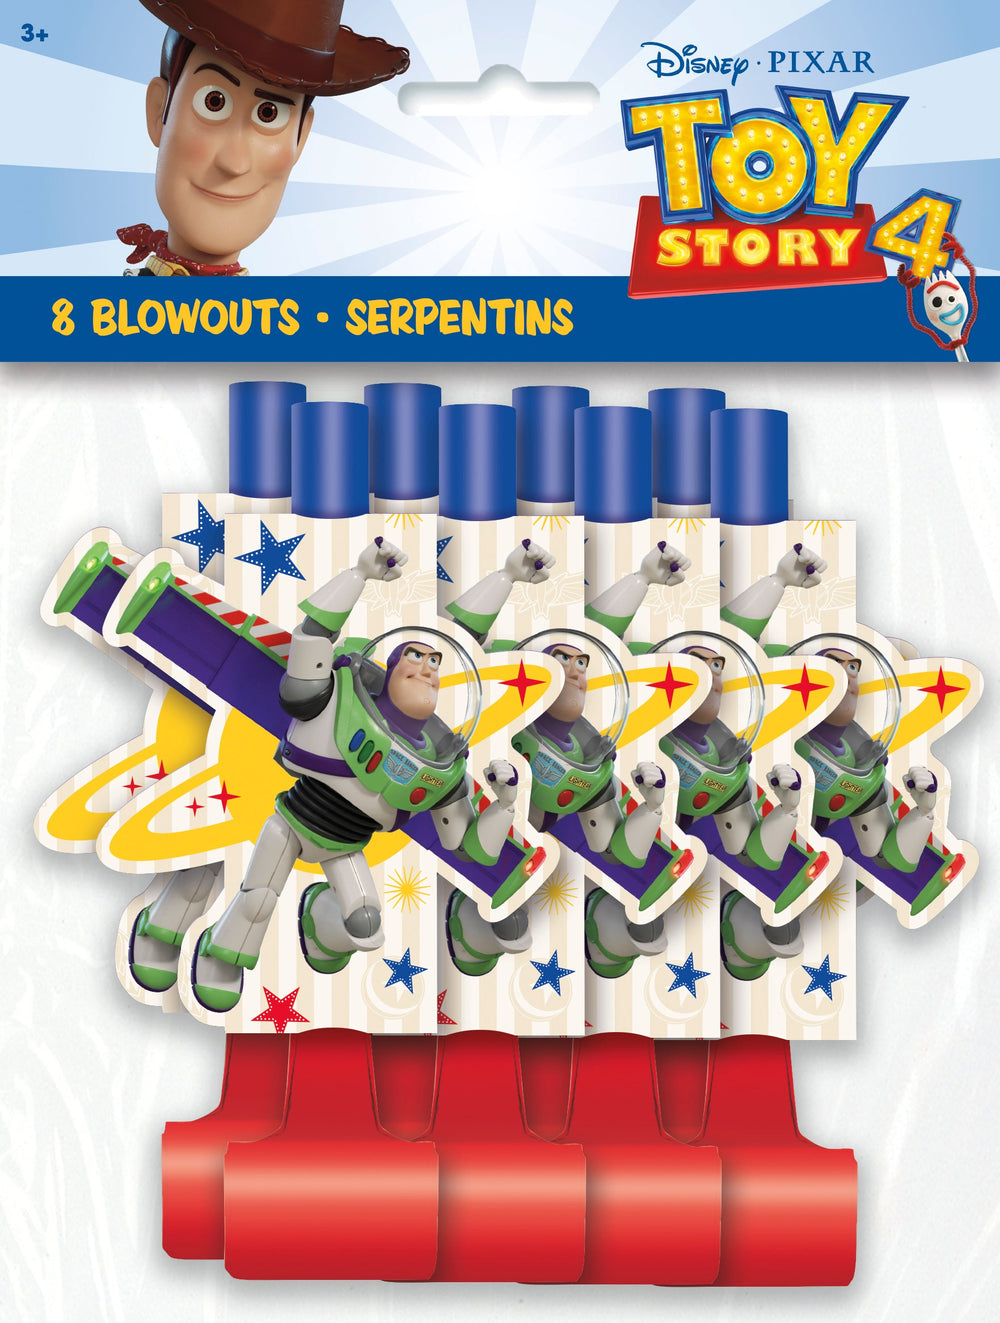 Affordable Toy Story Theme Party Blowouts - Easy Setup with Coordinated Themes, Pack of 8